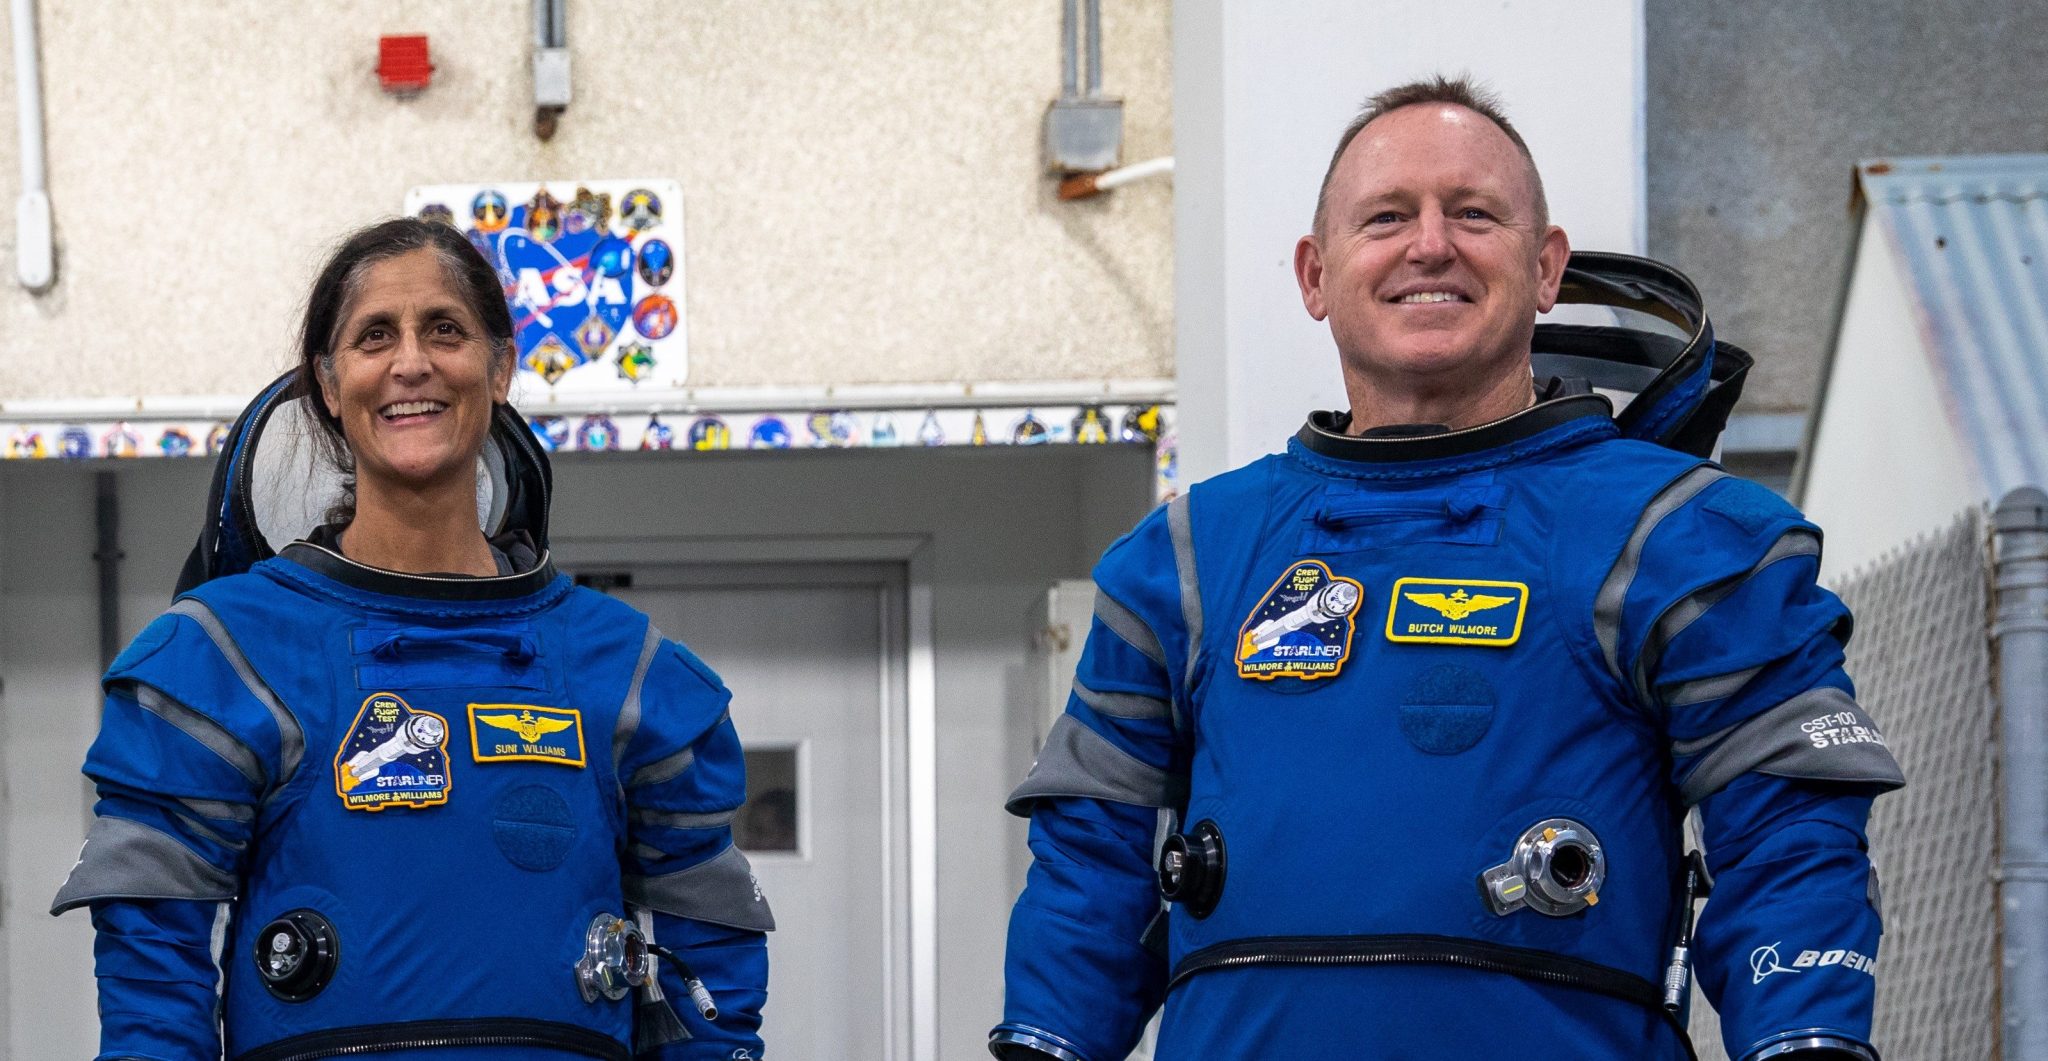 NASA astronauts Suni Williams and Barry “Butch” Wilmore, exit the Astronaut Crew Quarters at NASA’s Kennedy Space Center in Florida. They are both wearing blue flight suits with the mission patch and name patches visible on the front, as well as white shoe covers on their feet.